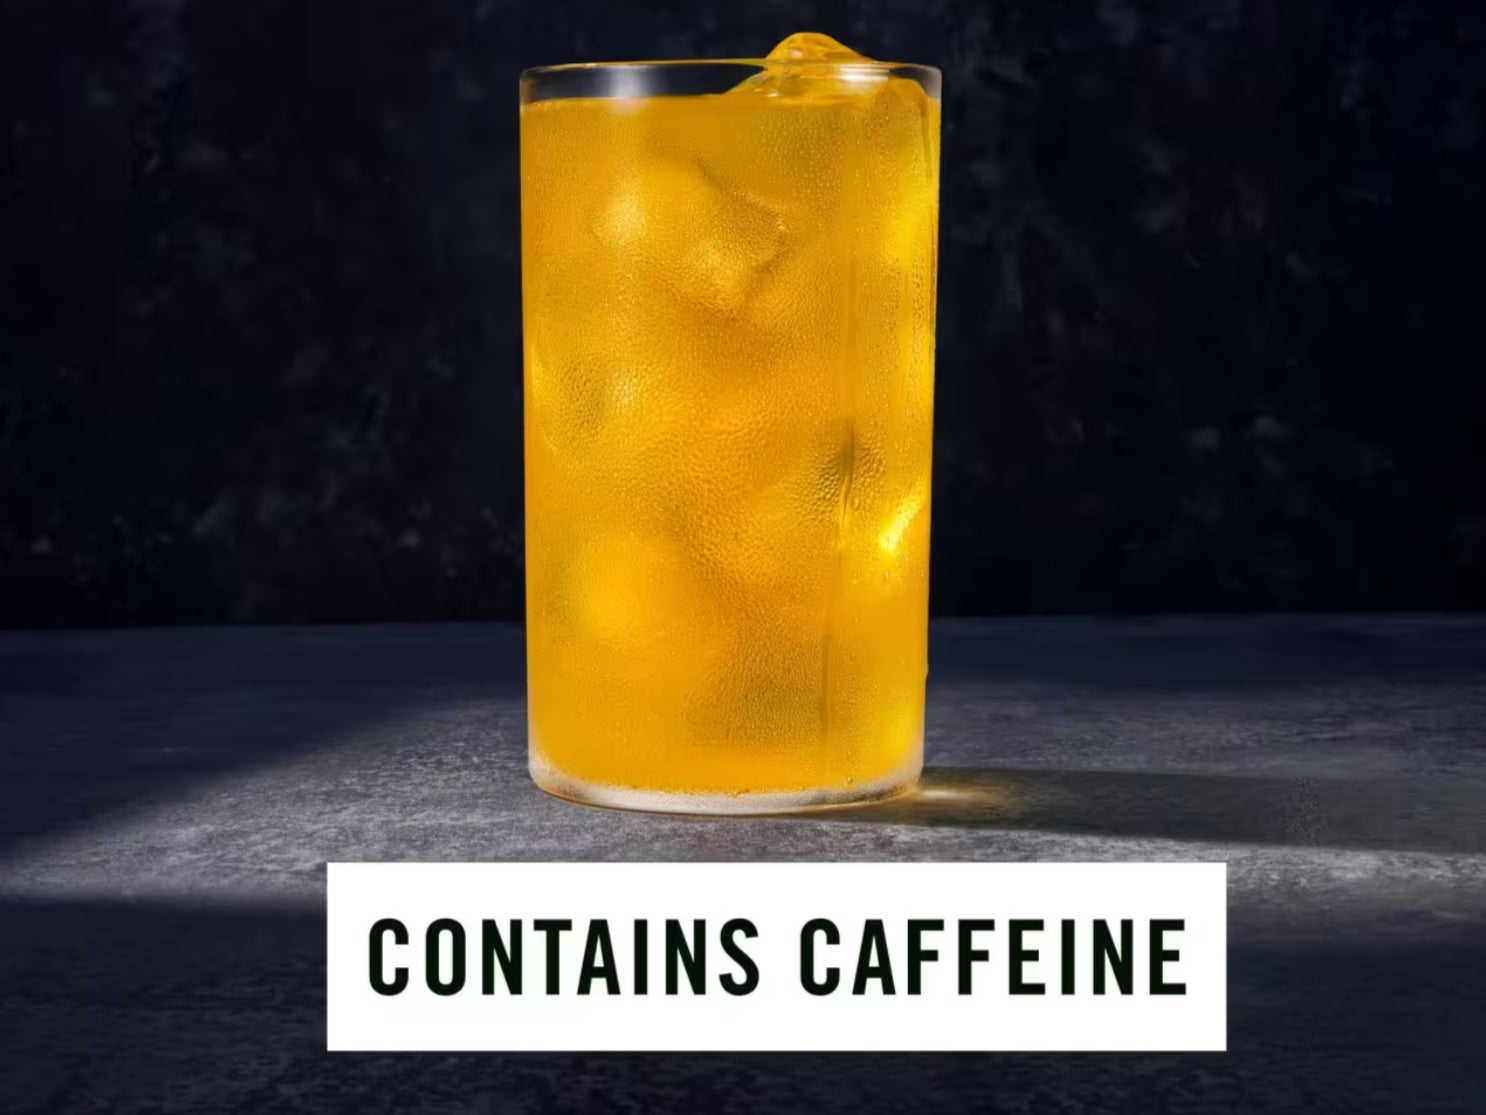 New label added to Panera’s “charged lemonade” drinks